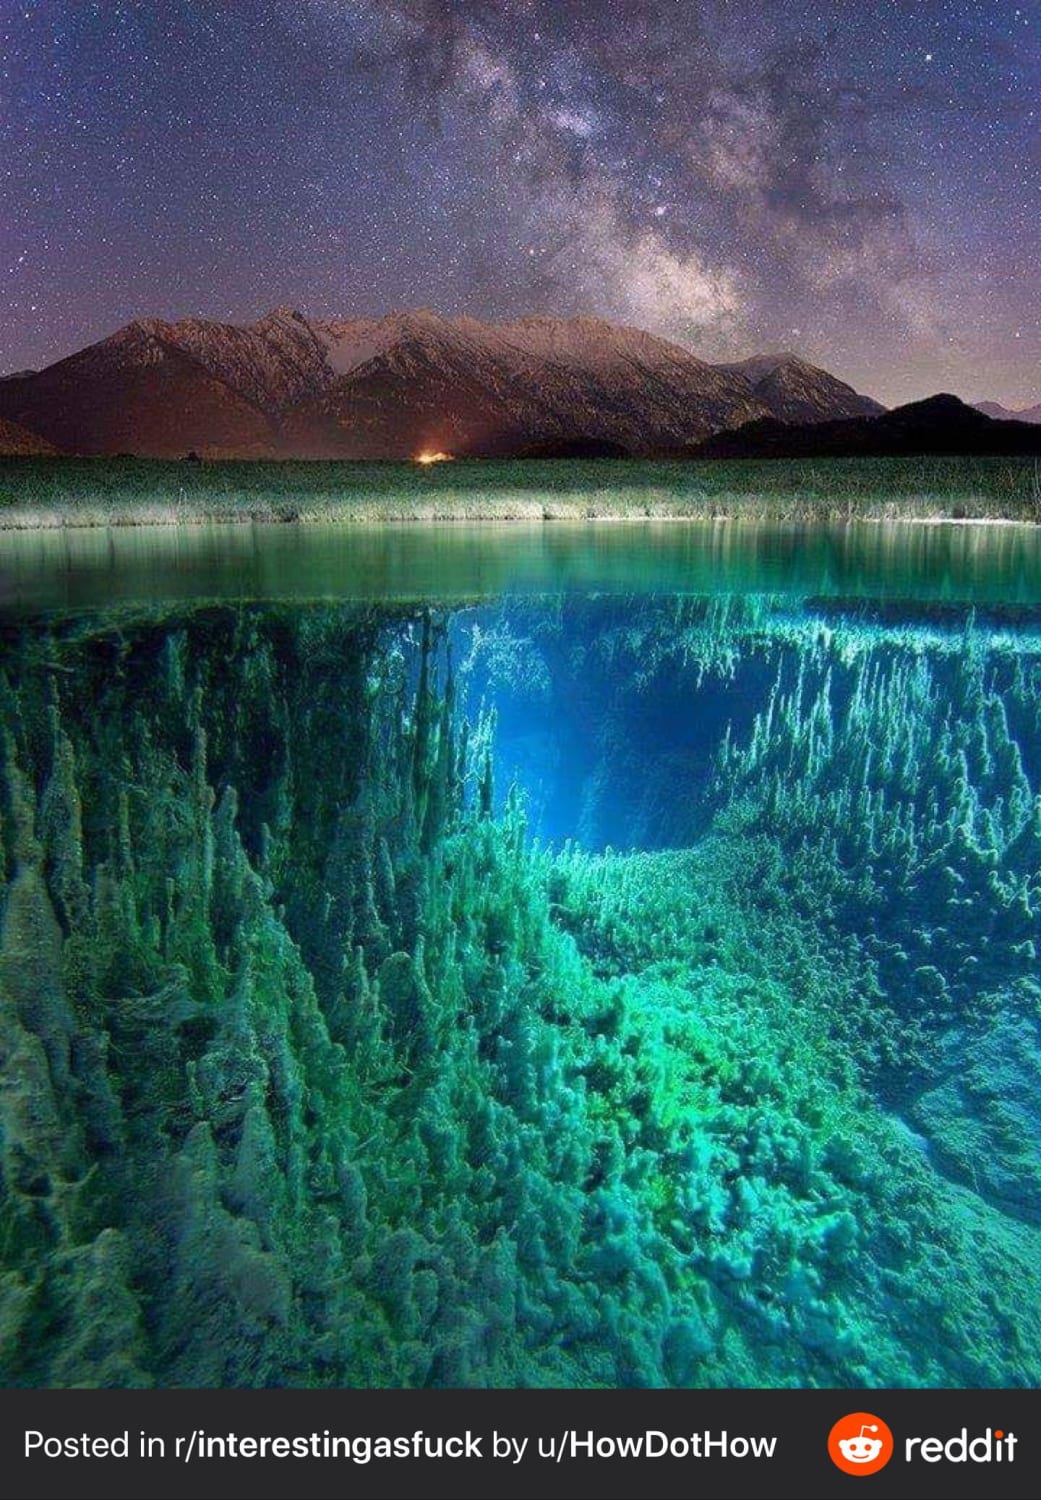 Breathtaking in two different ways... beautiful night sky and chilling depths!